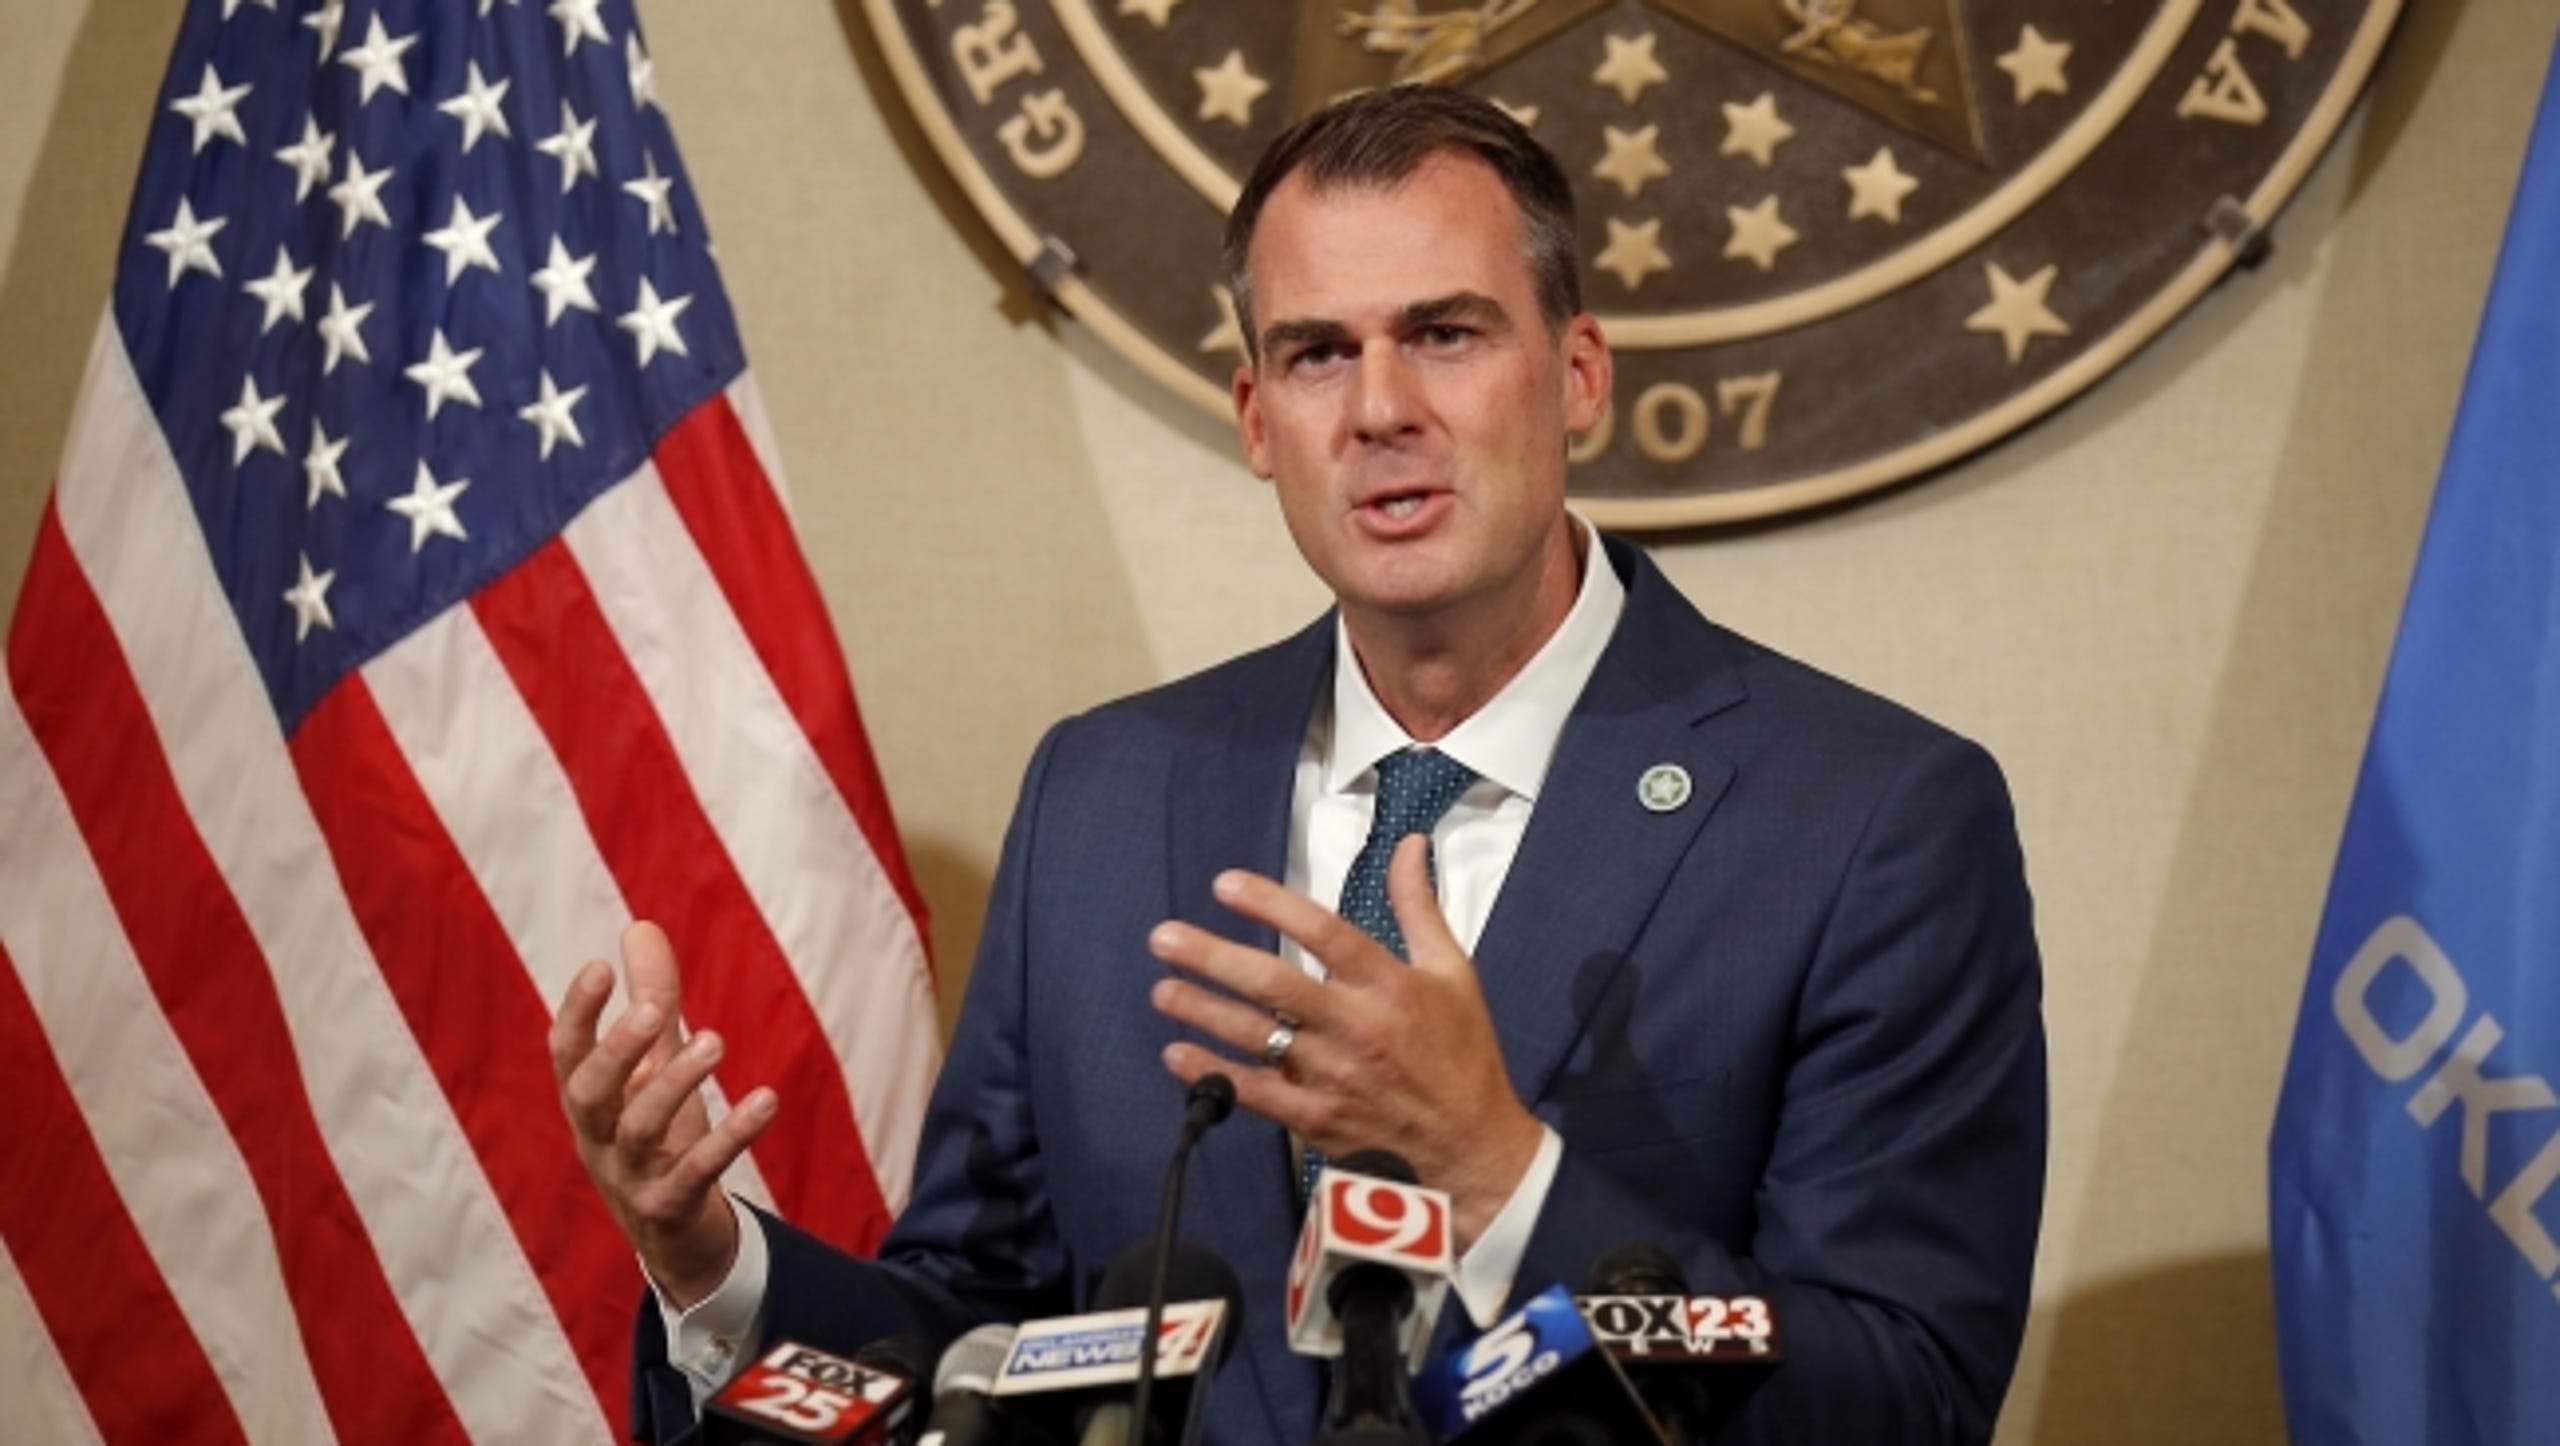 Gov. Kevin Stitt speaks during a press conference at the State capitol in Oklahoma City, Thursday, July 30, 2020. Photo by Sarah Phipps, The Oklahoman